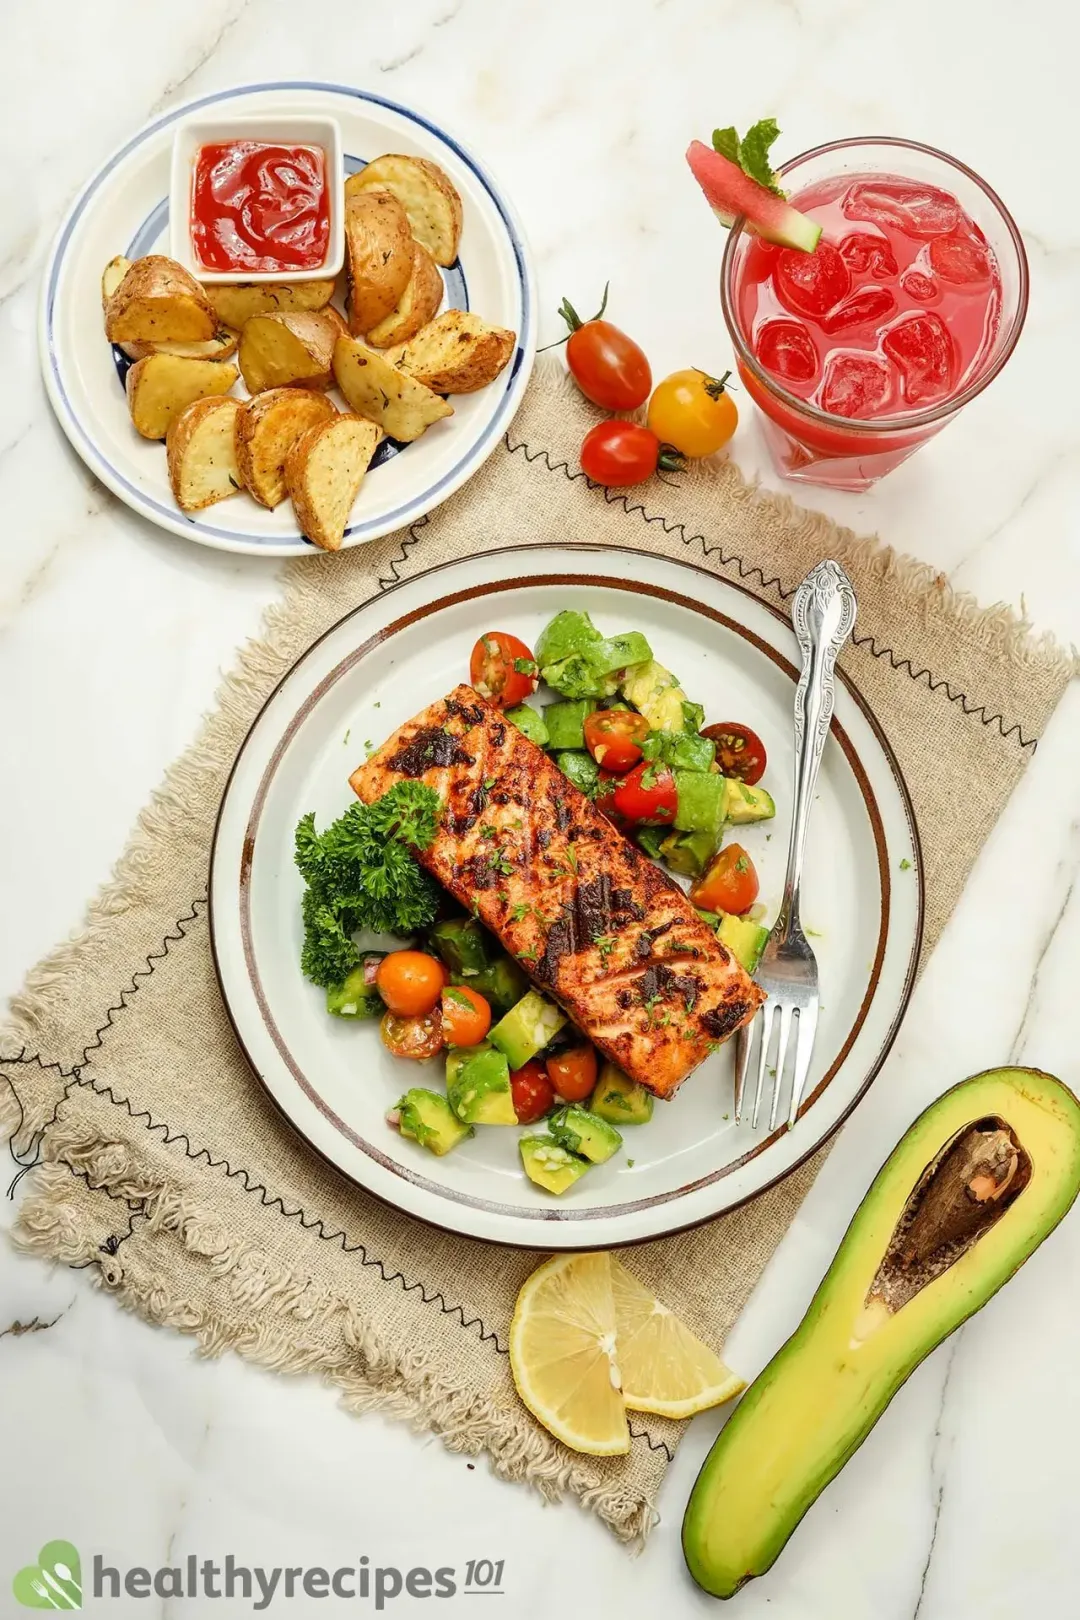 A plate of salmon avocado alongside a plate of air fryer potato wedges with sauce and a glass of watermelon juice